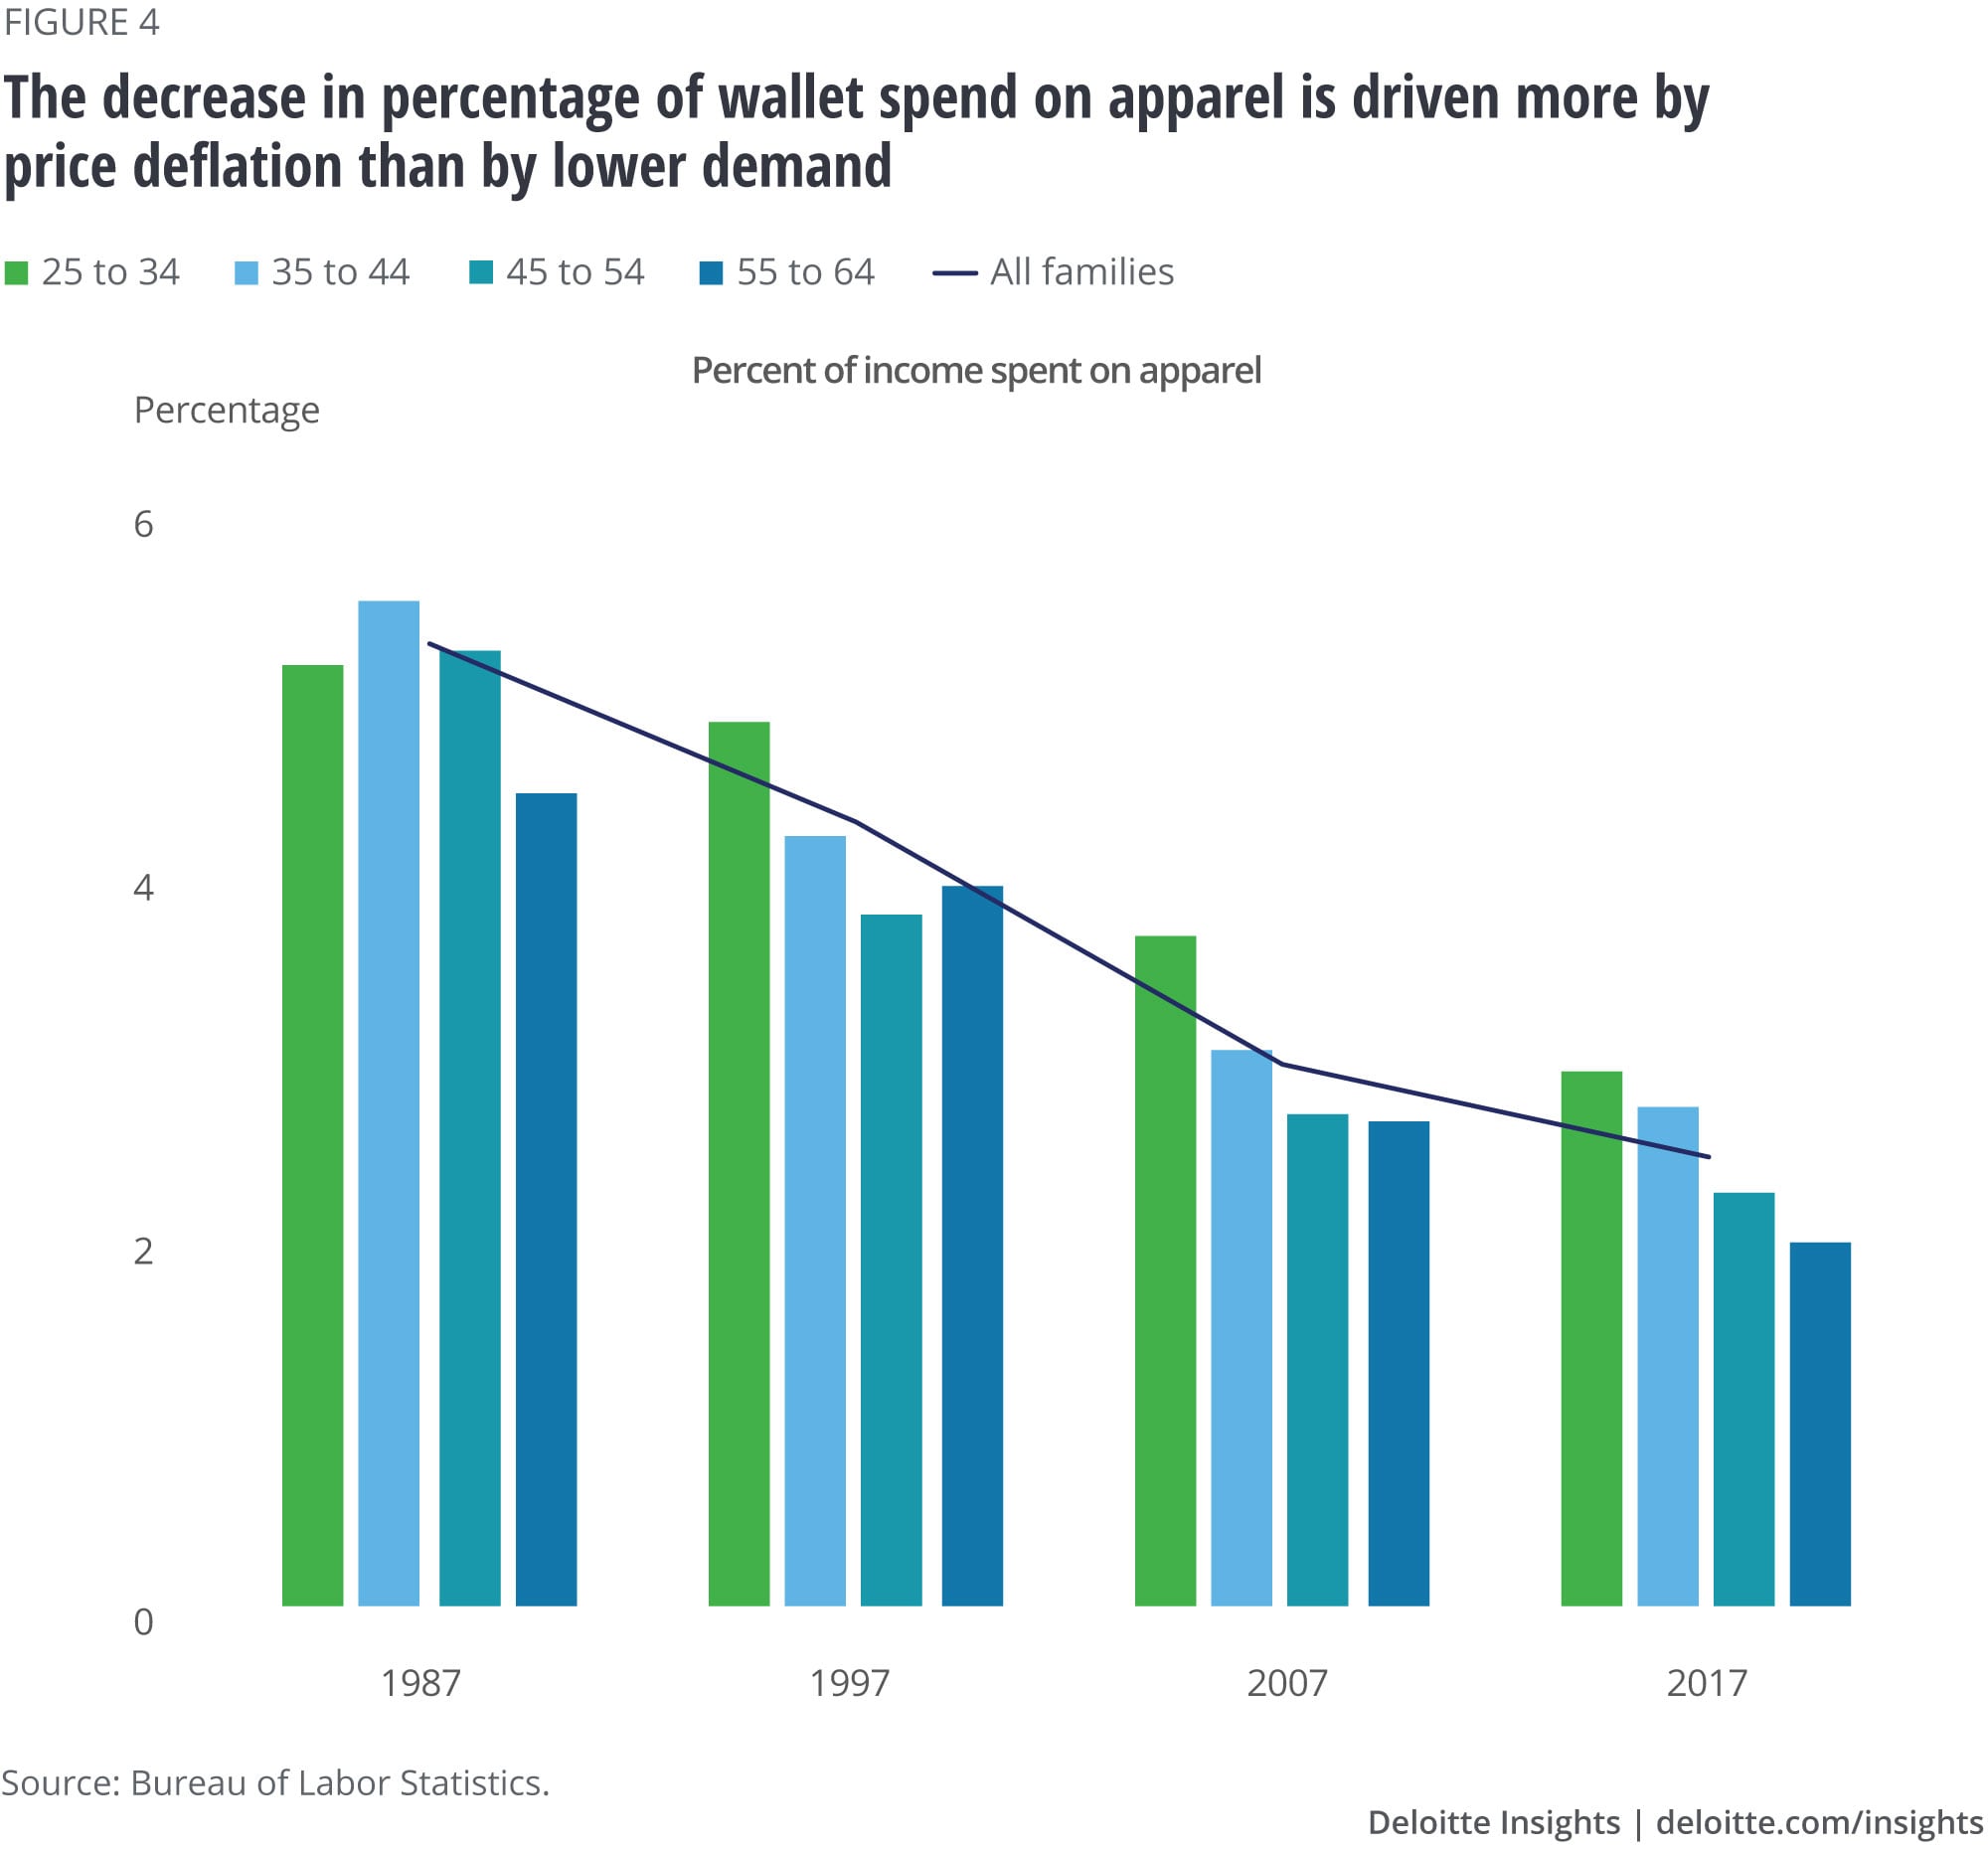 The decrease in percentage of wallet spend on apparel is driven more by price deflation than by lower demand